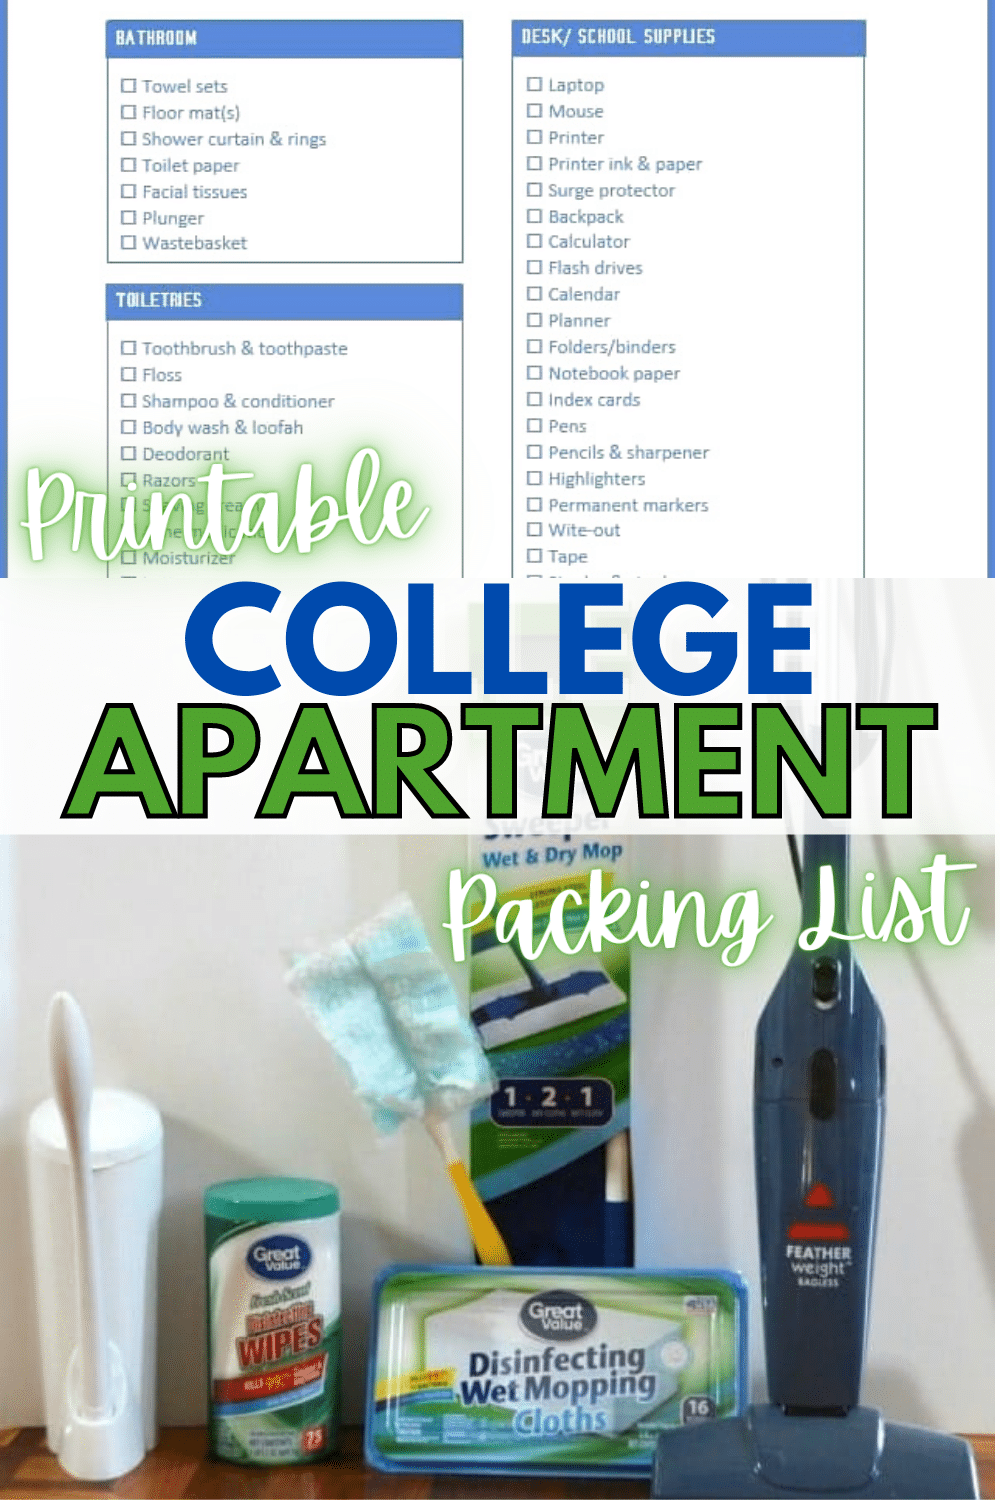 Moving out of the dorms and into an apartment is exciting. Make sure you have everything you need with this college apartment packing list. #collegeapartment #packinglist #printable #freeprintable via @wondermomwannab